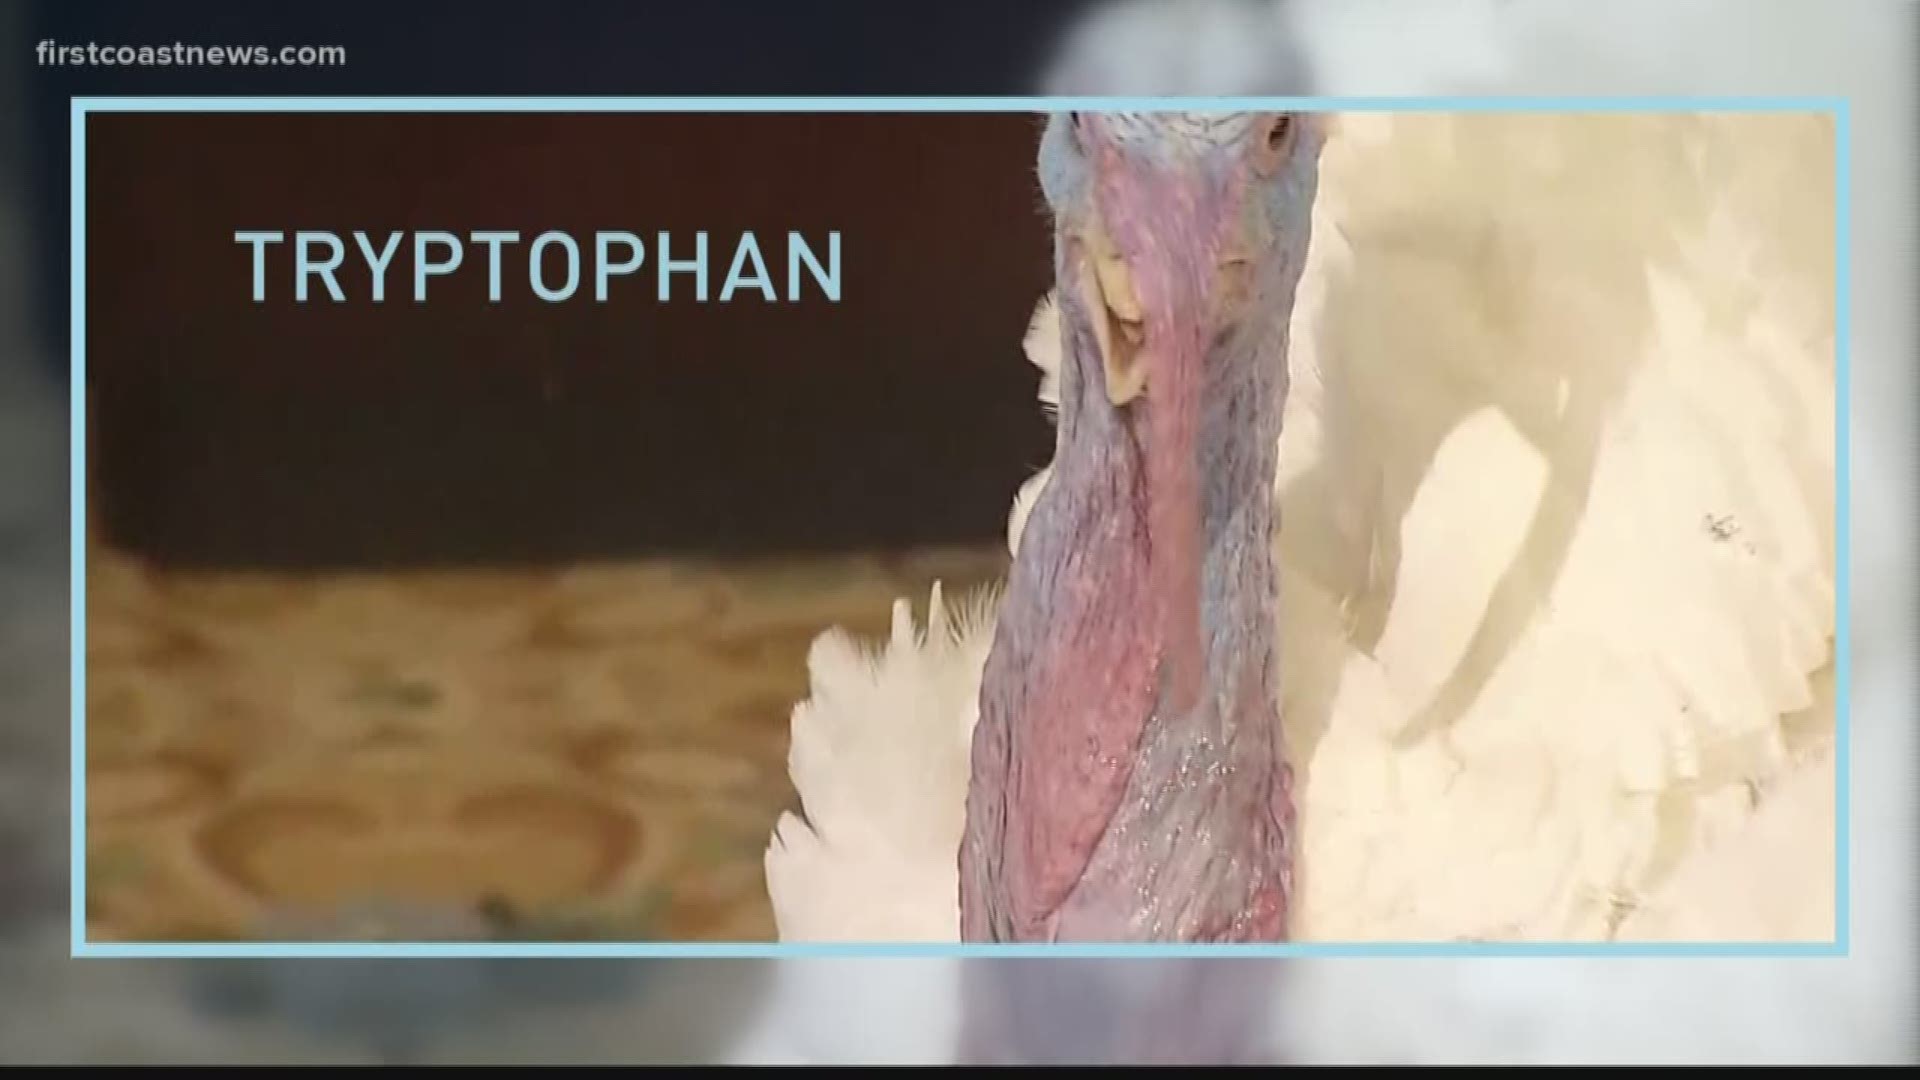 We set out to verify if tryptophan in turkey meat causes you to get sleepy after eating it.